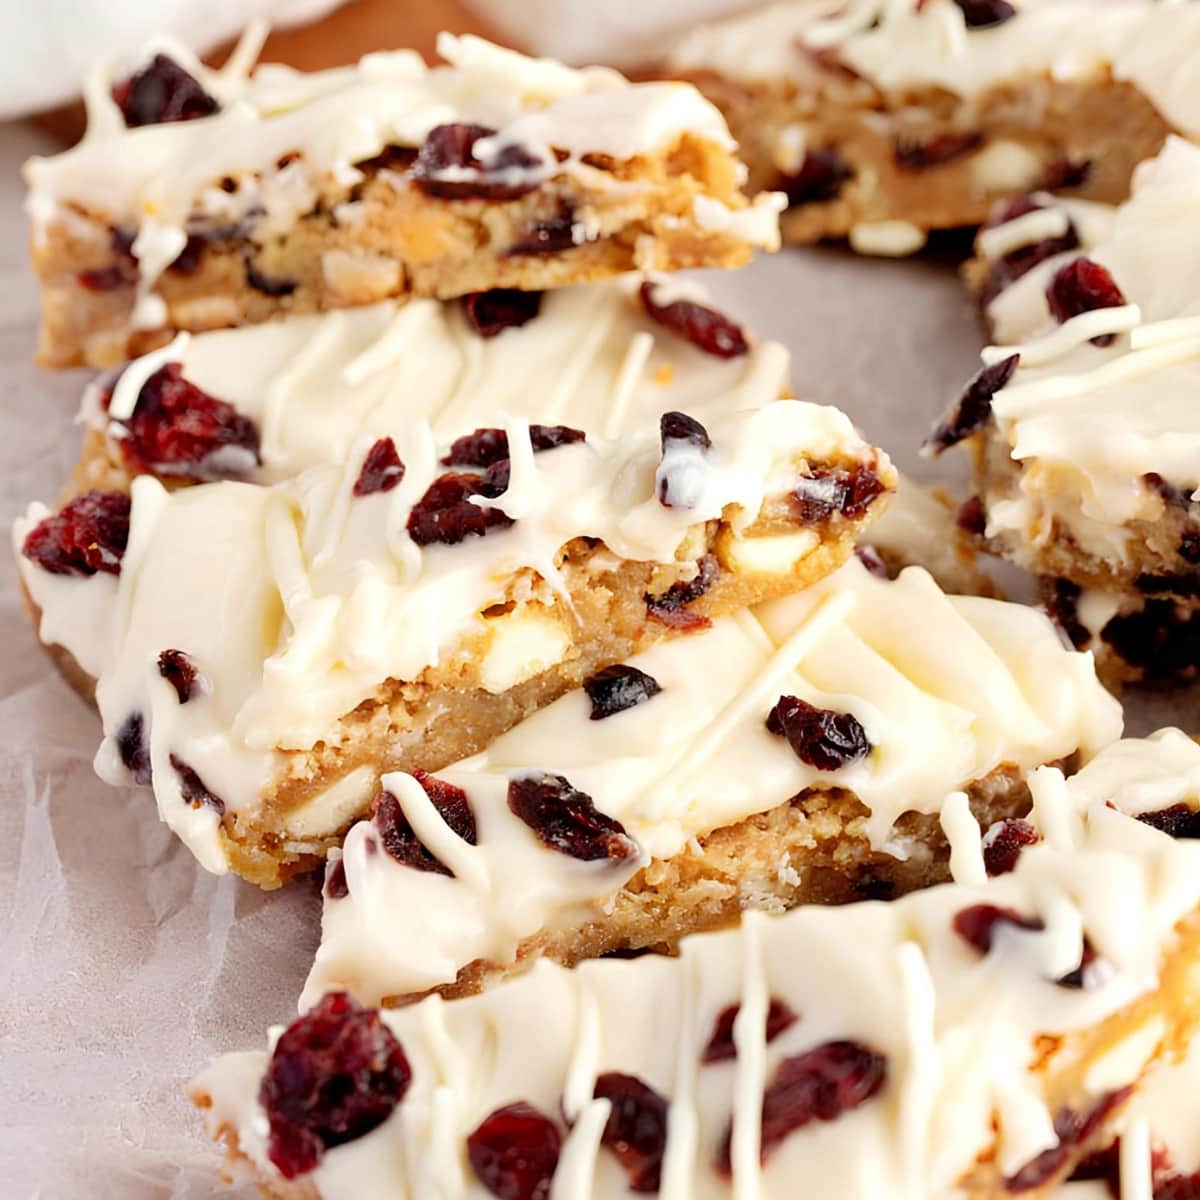 Sliced Cranberry Bliss bars, Topped With White Chocolate Drizzle